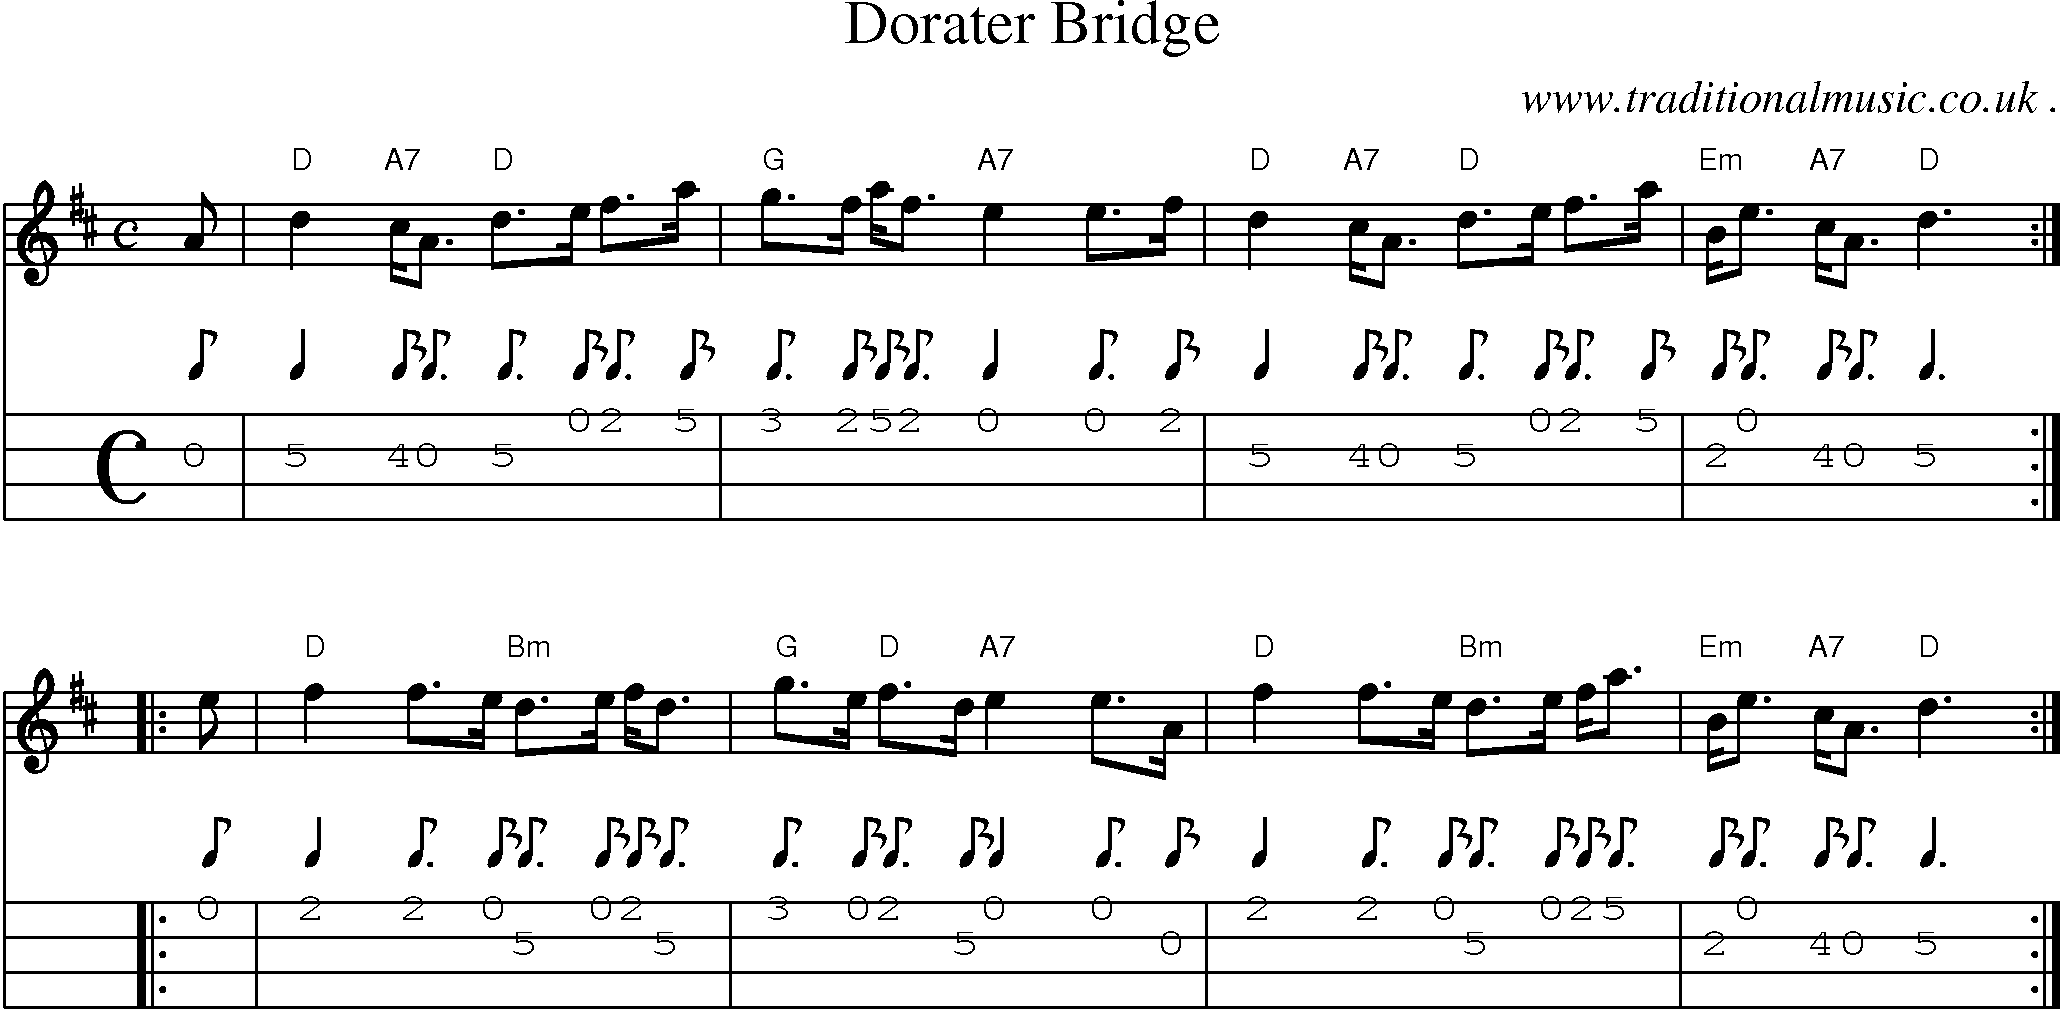 Sheet-music  score, Chords and Mandolin Tabs for Dorater Bridge